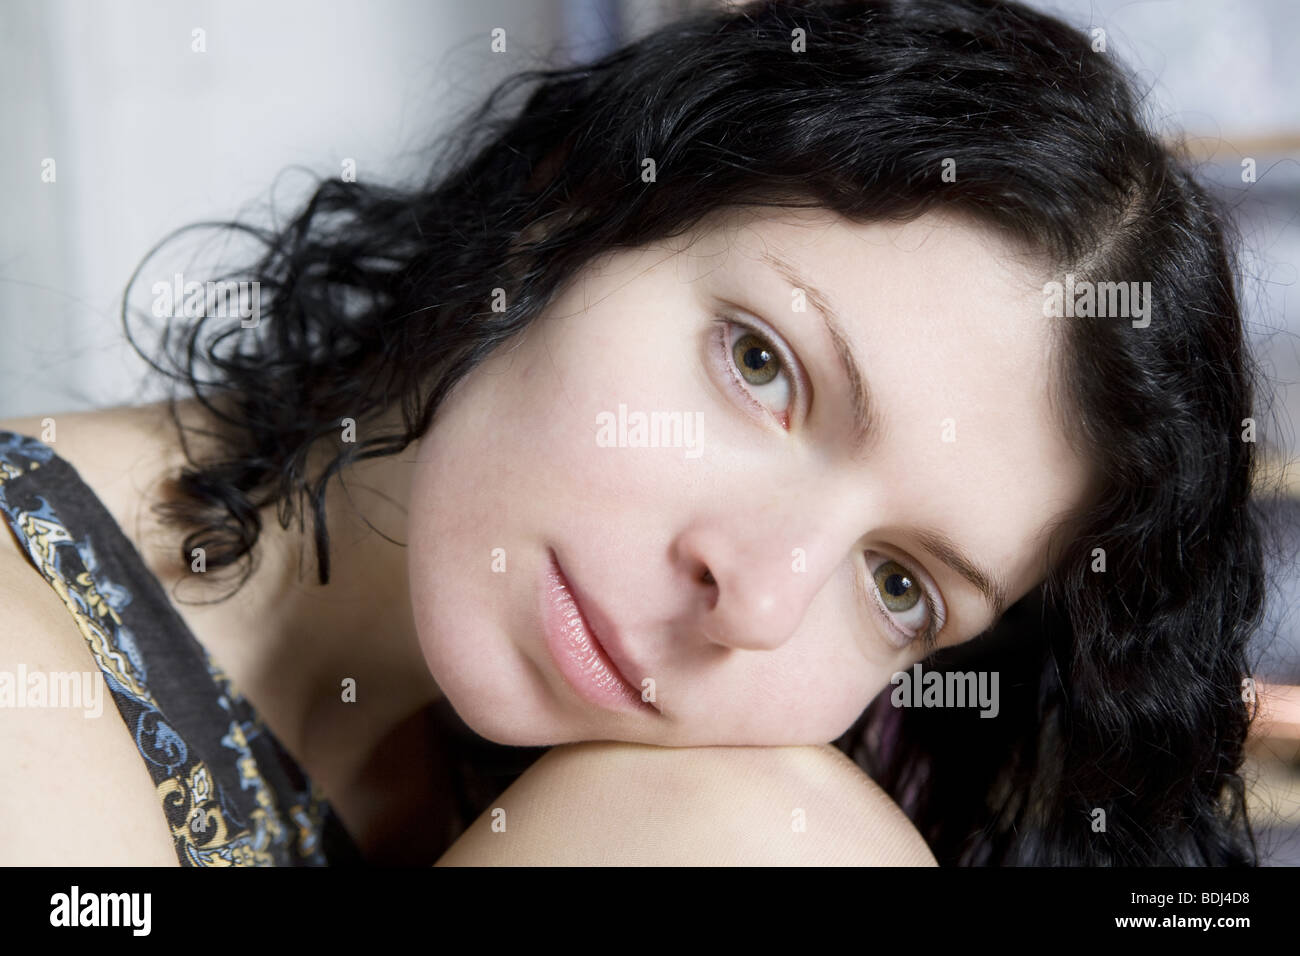 Curl portrait young brunette woman looking at camera Banque D'Images